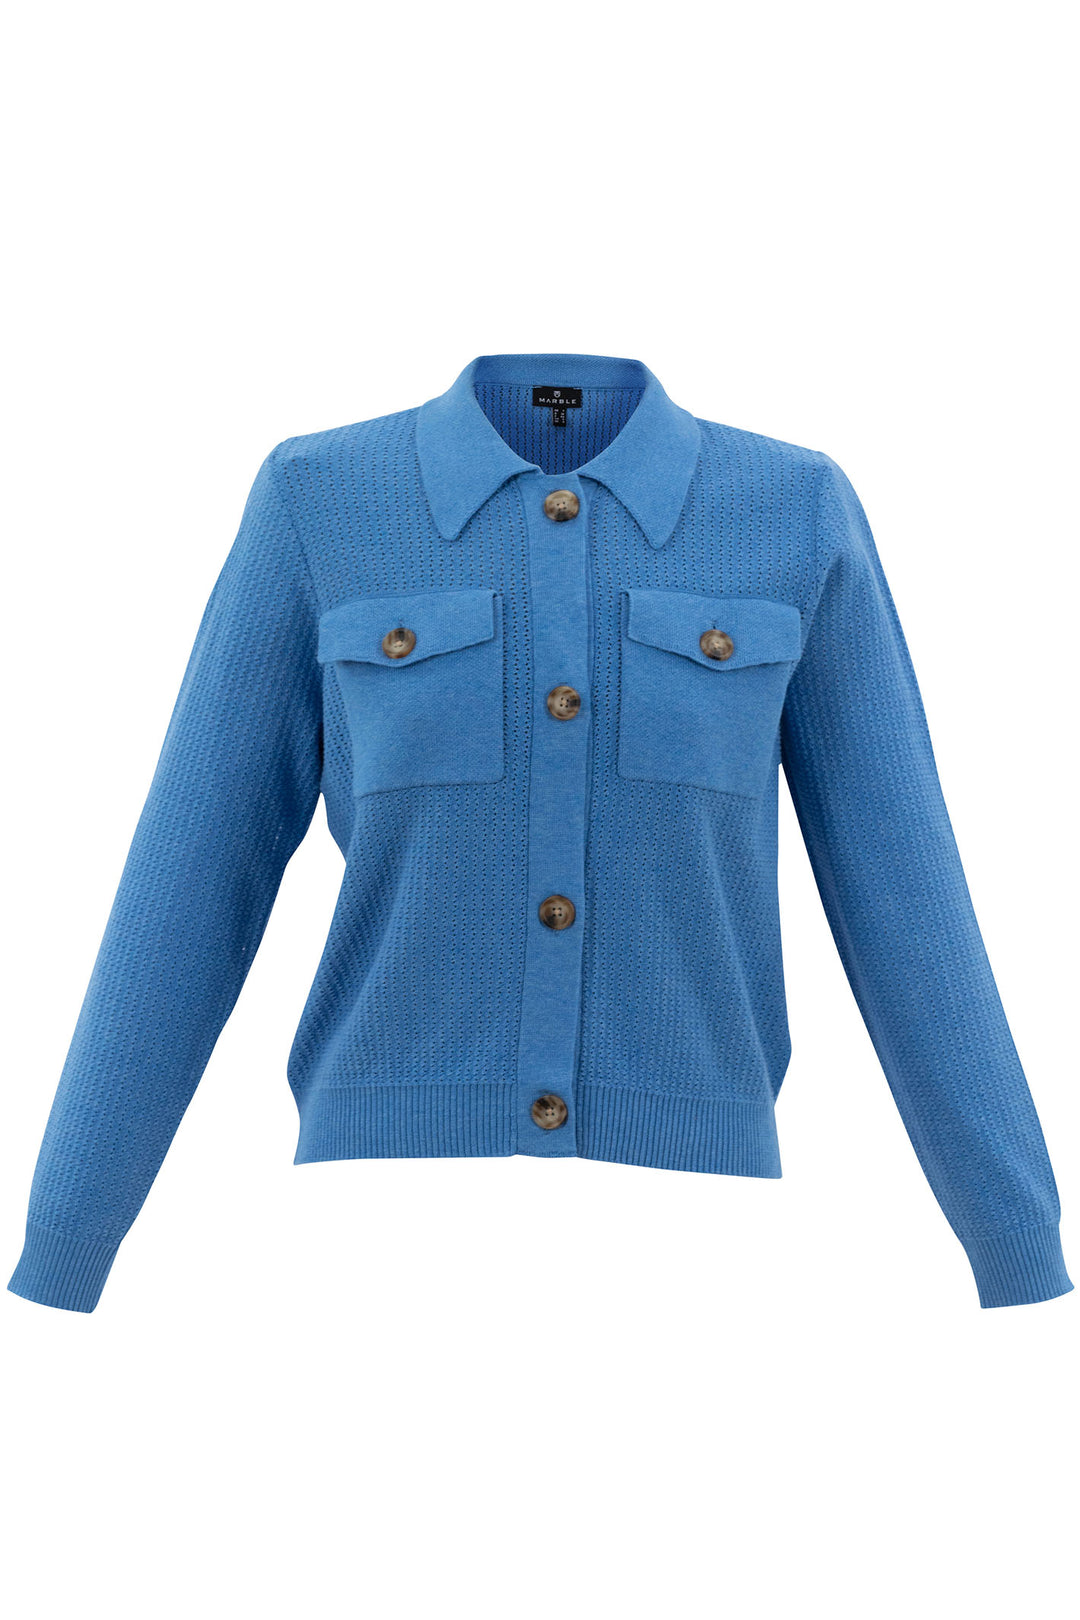 Marble Fashions 7352 213 Blue Button Front Shirt Style Cardigan - Experience Boutique